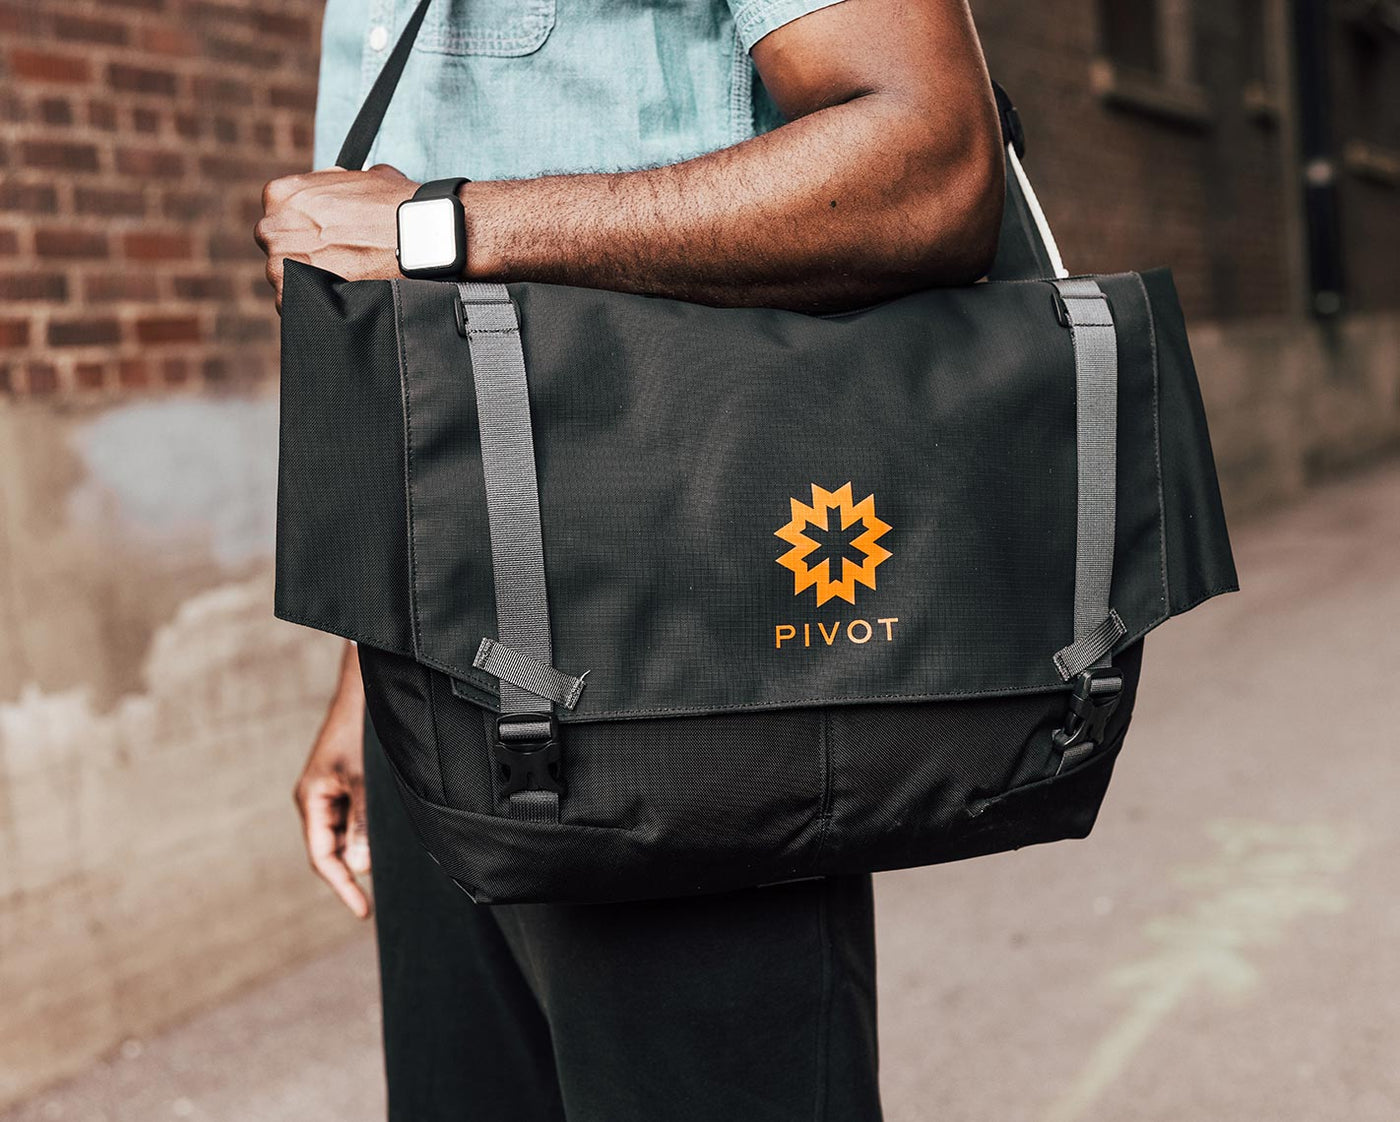 Urban Messenger Bag, promotional gear for business and events, on model